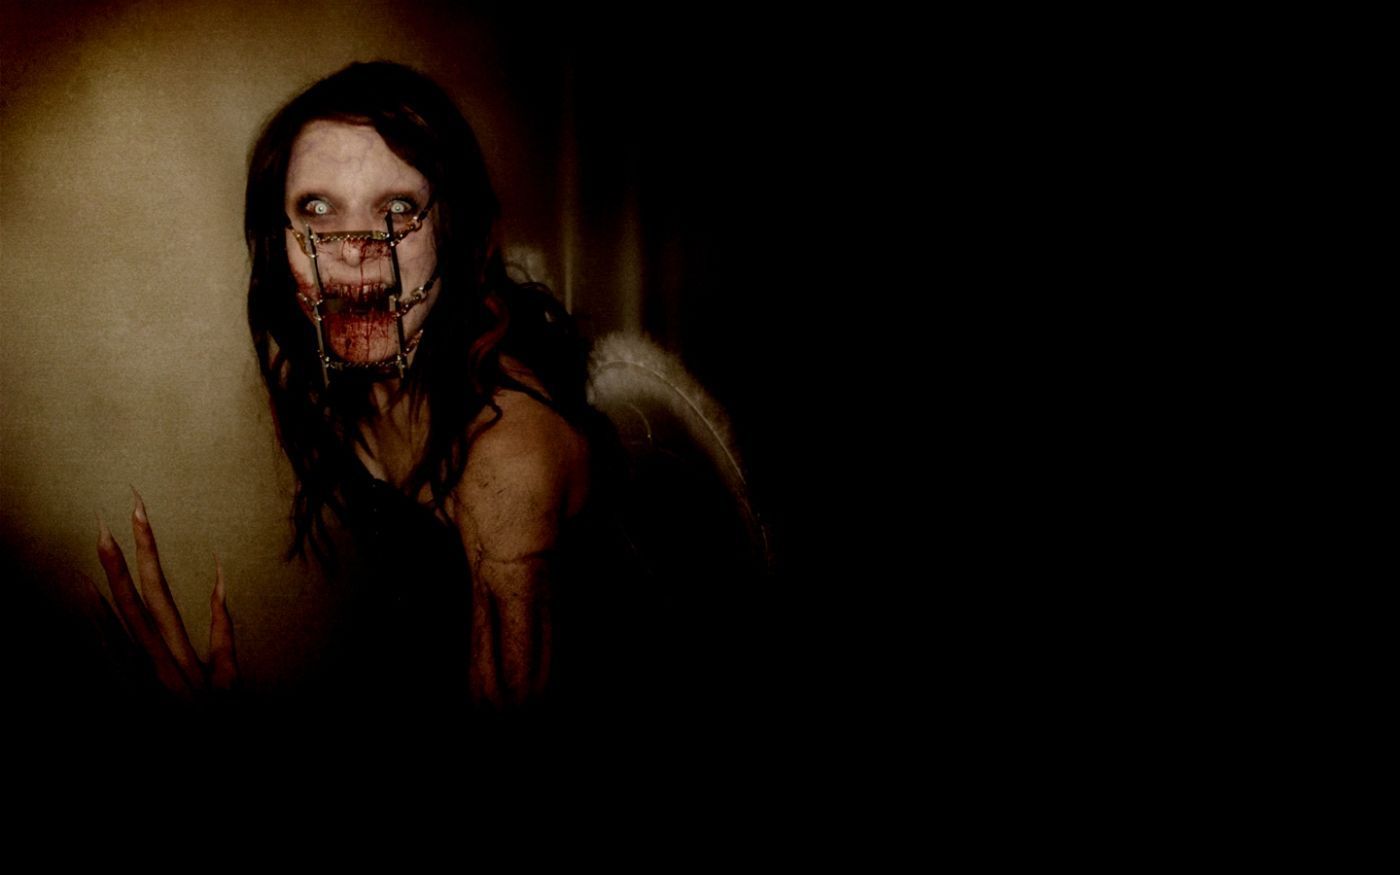 apocaliyptic zombies hd wallpaper | Only hd wallpapers